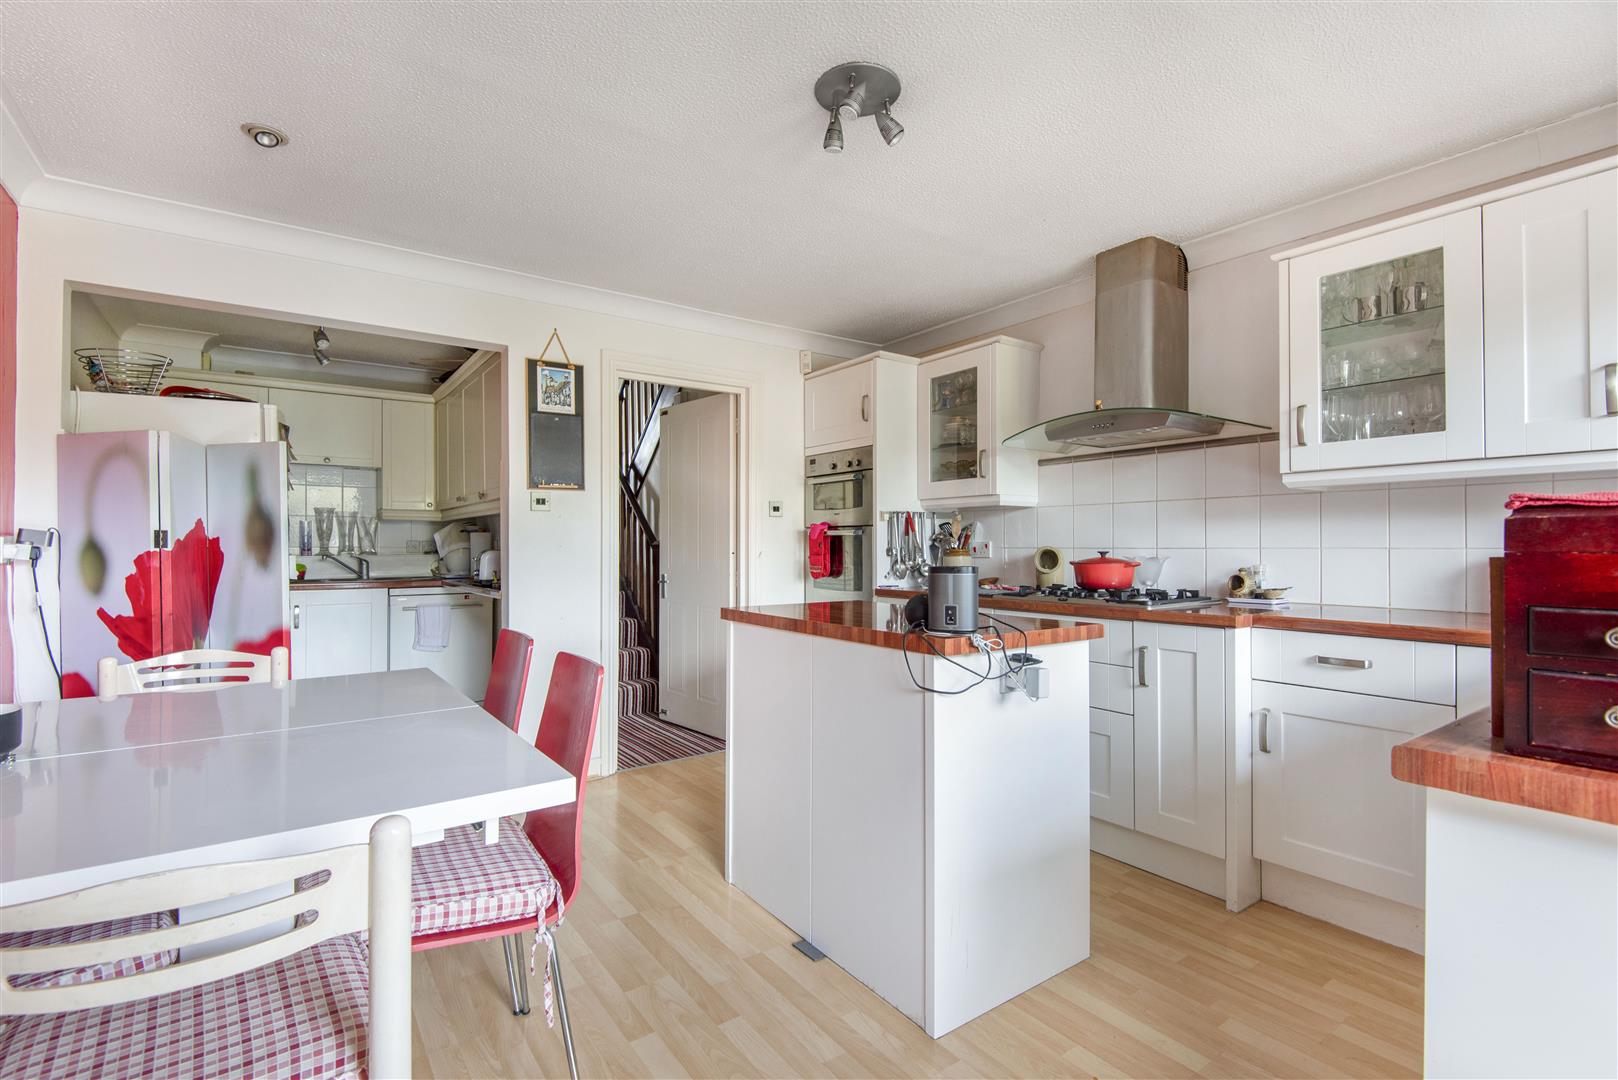 Lynmouth Road Reading house for sale in Reading